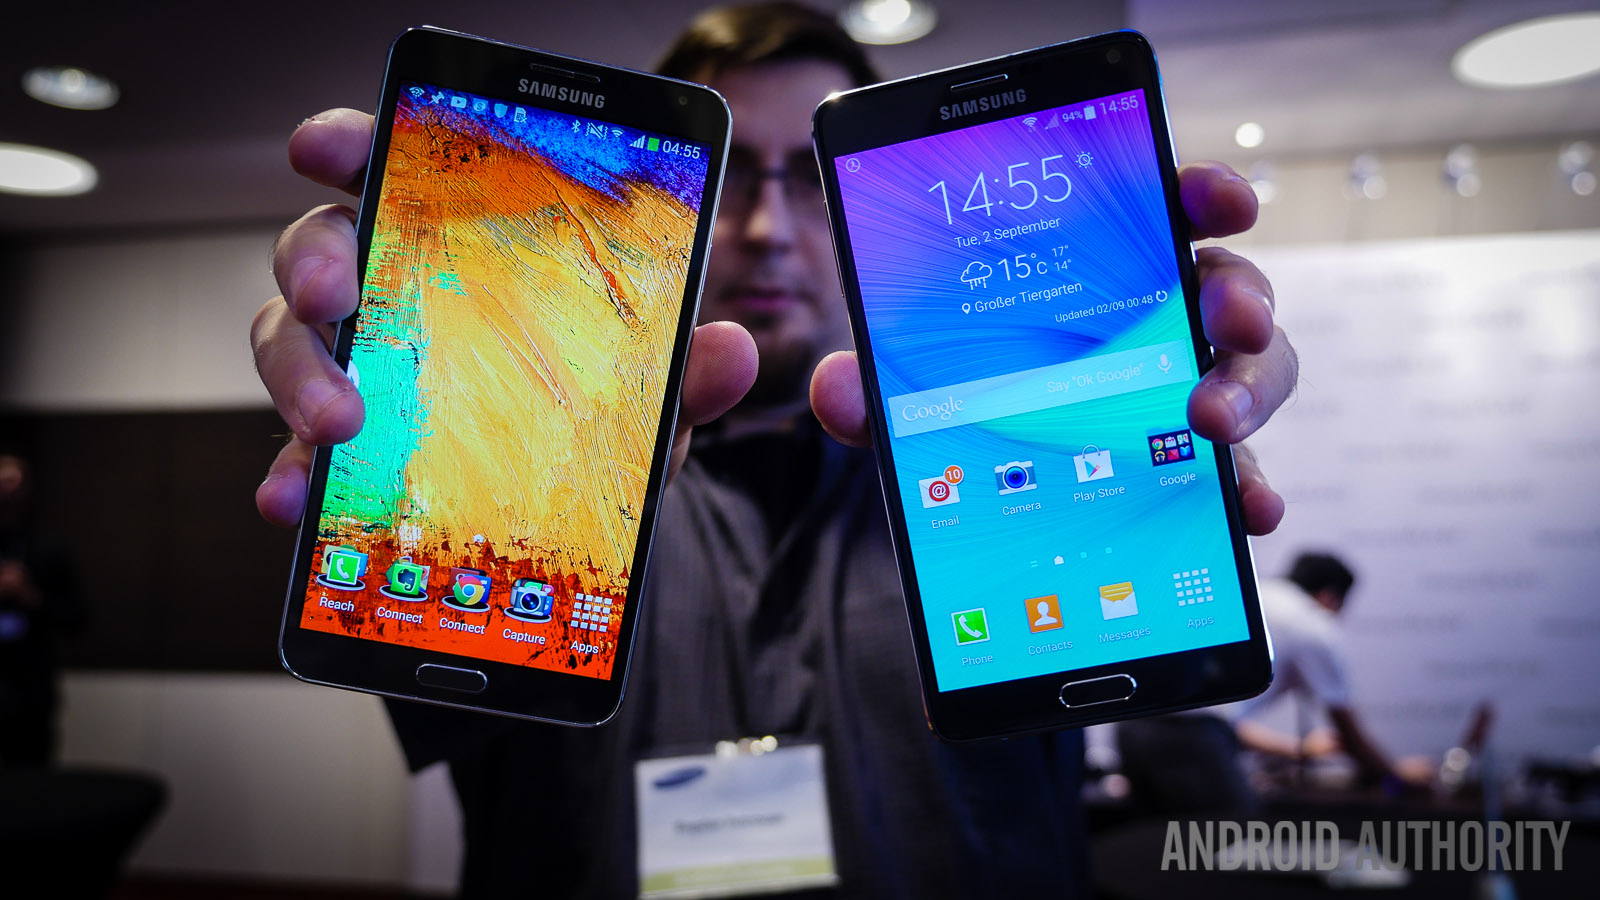 samsung galaxy note 4 vs note 3 quick look aa (9 of 11)